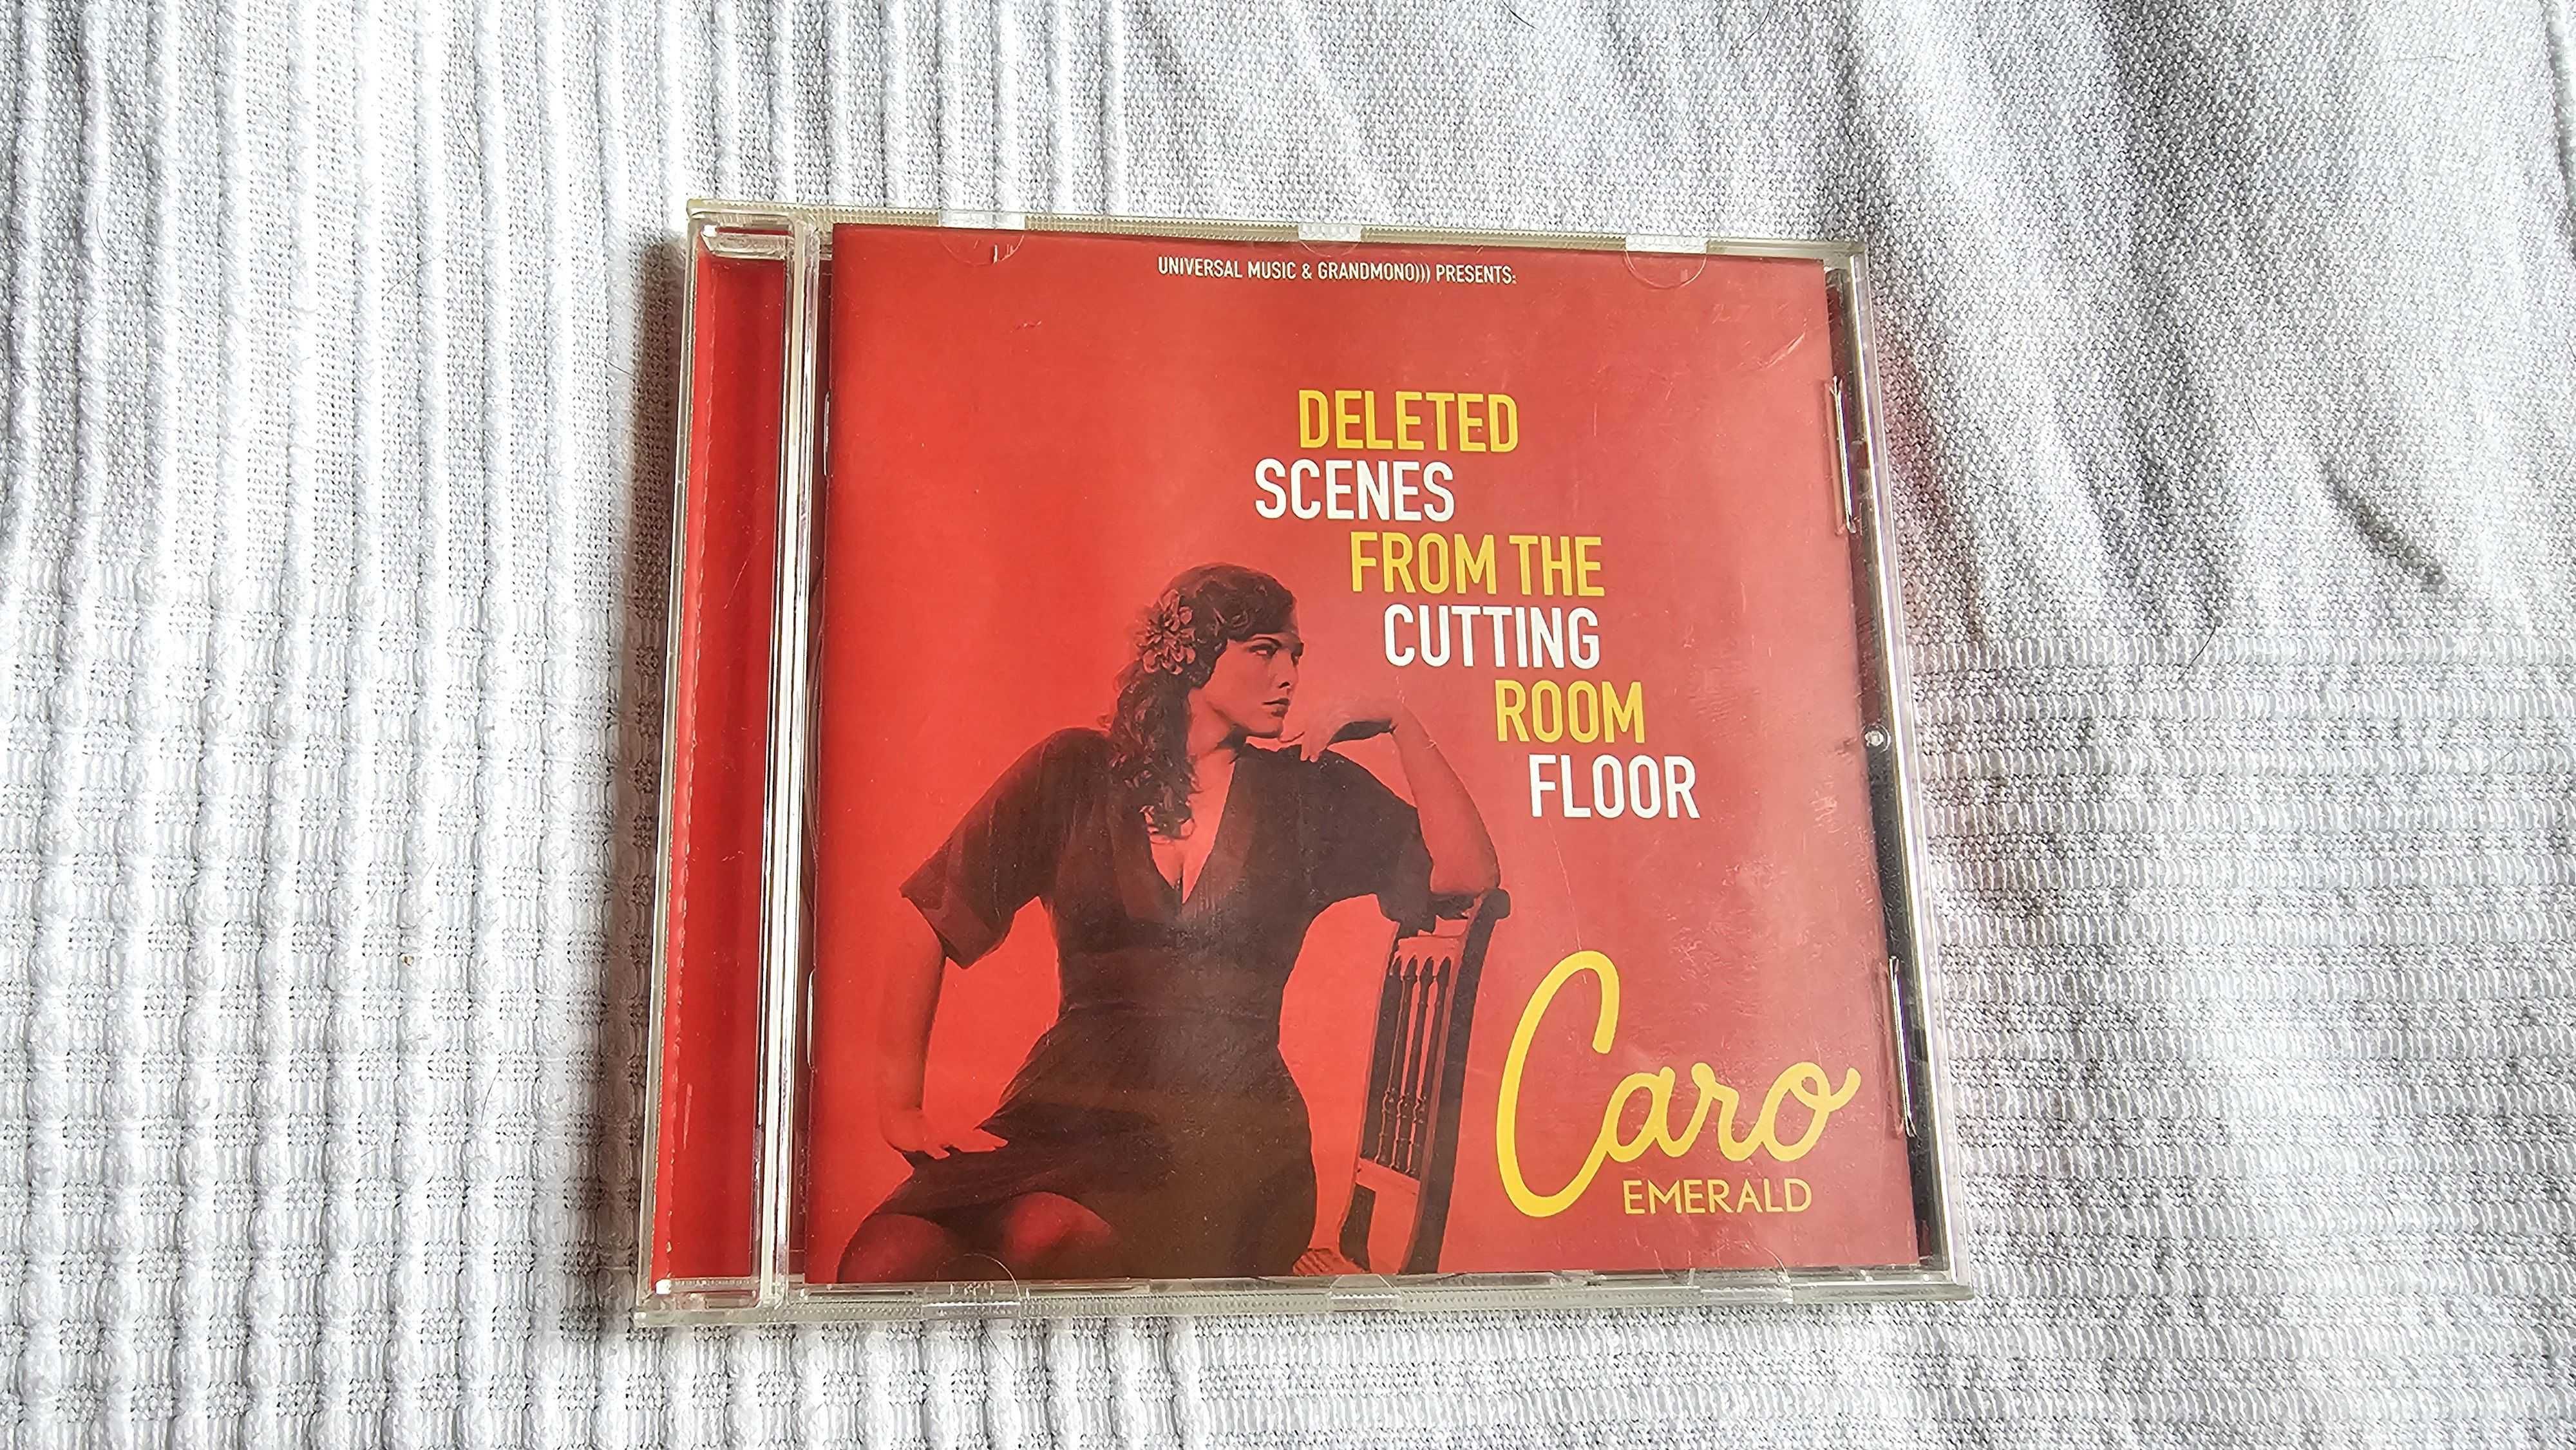 CD Caro Emerald - Deleted Scenes from the Cutting Room Floor